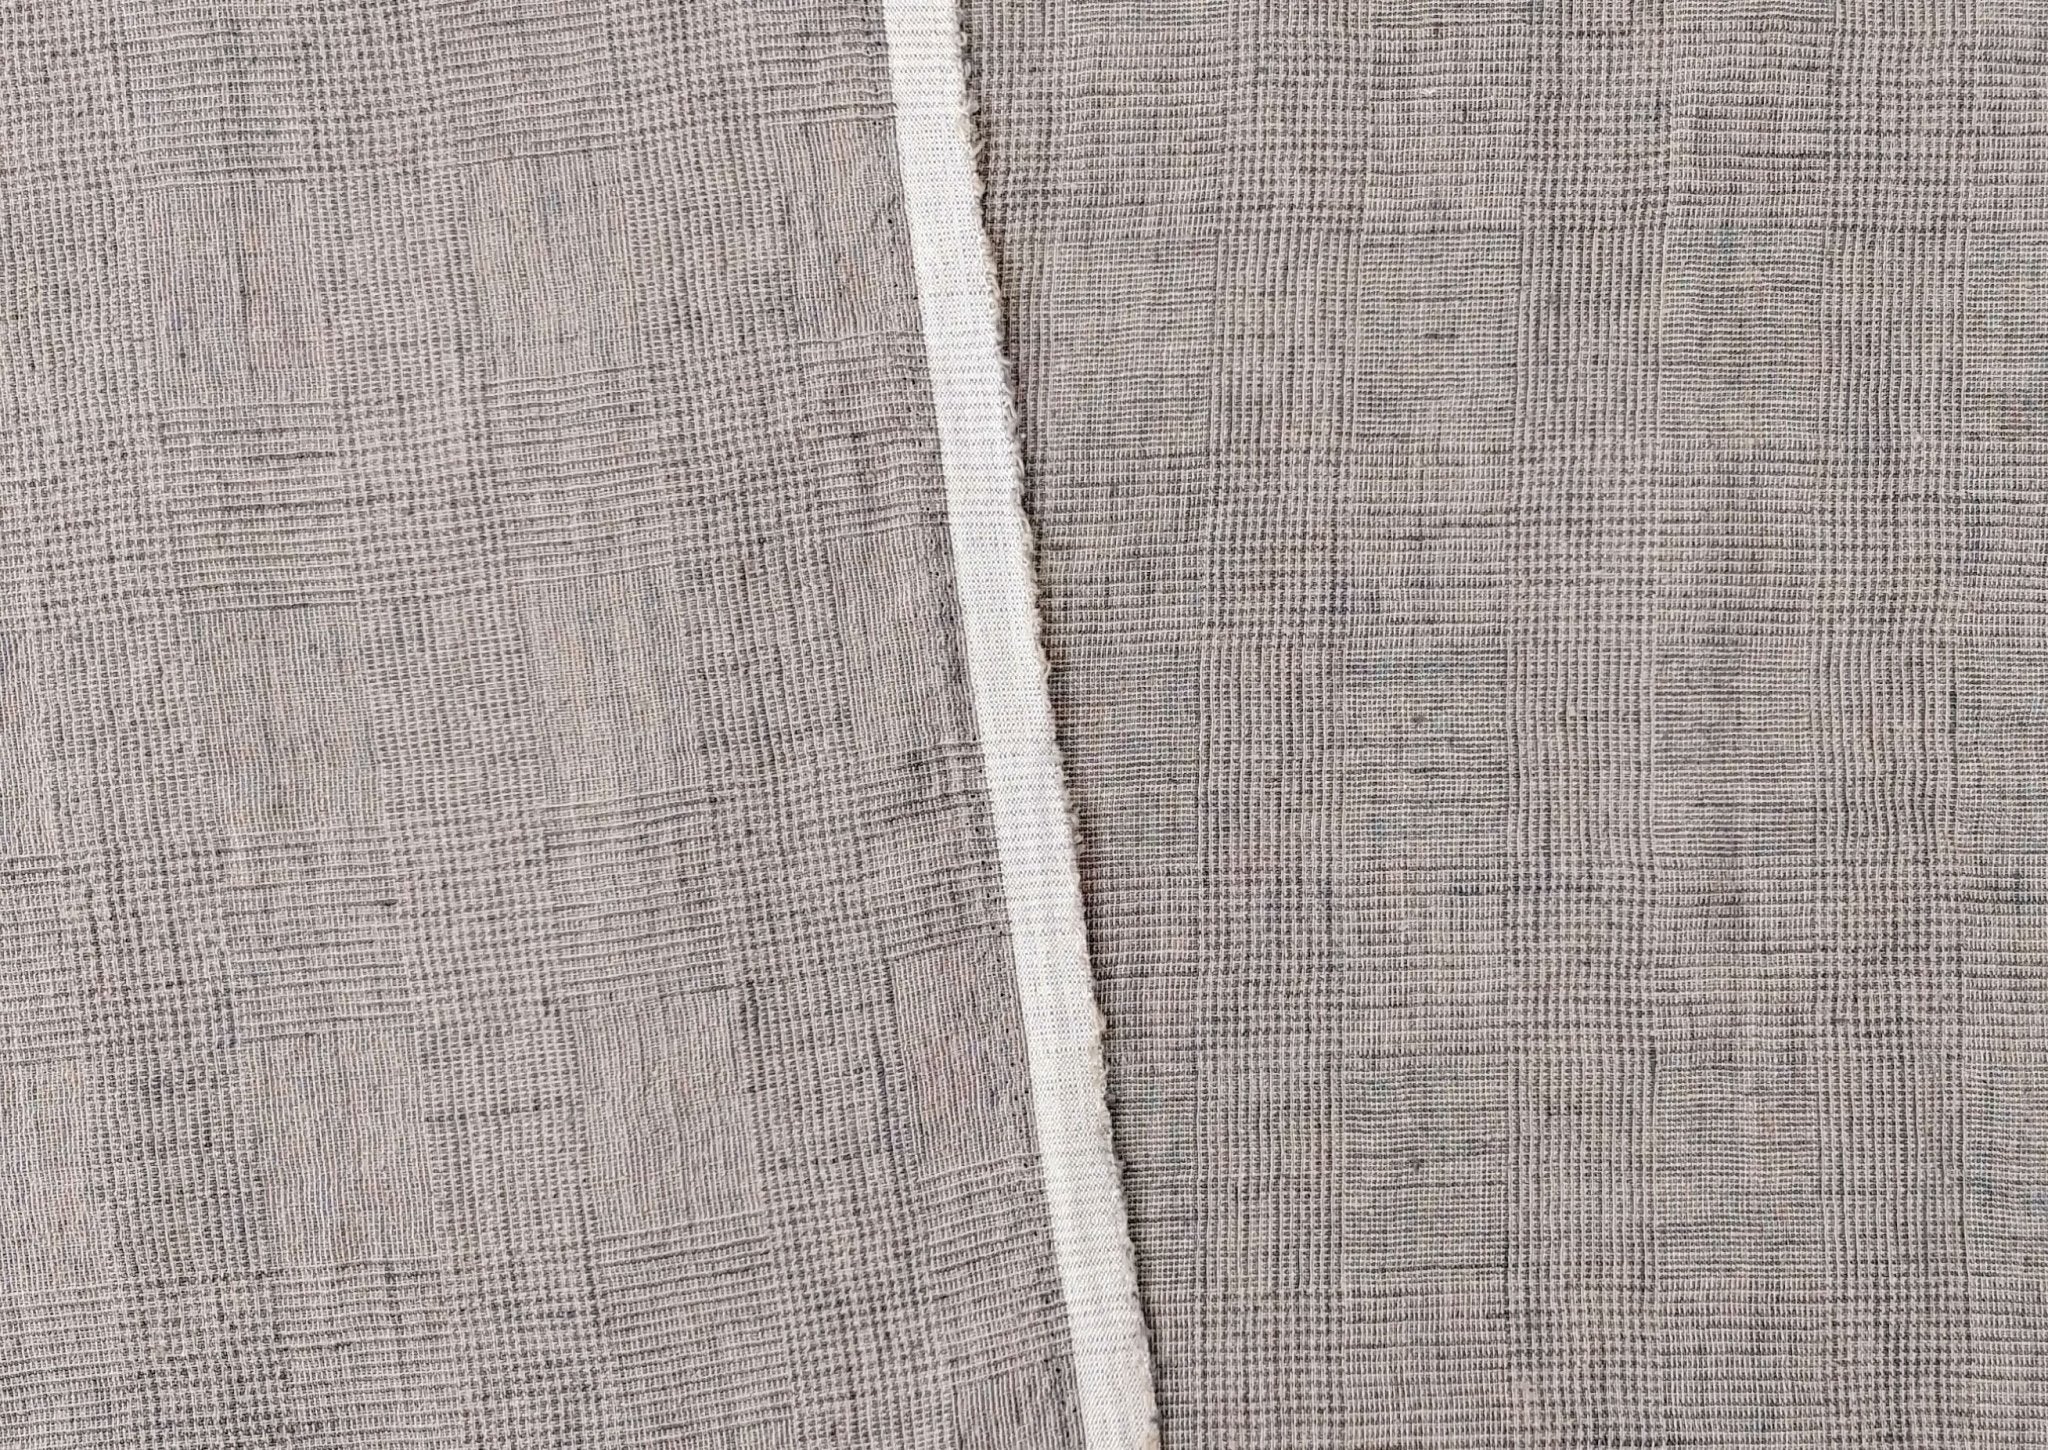 Linen Polyester Glen Plaid Fabric with Delave Effect 7062 7063 6805 - The Linen Lab - Greyish Beige